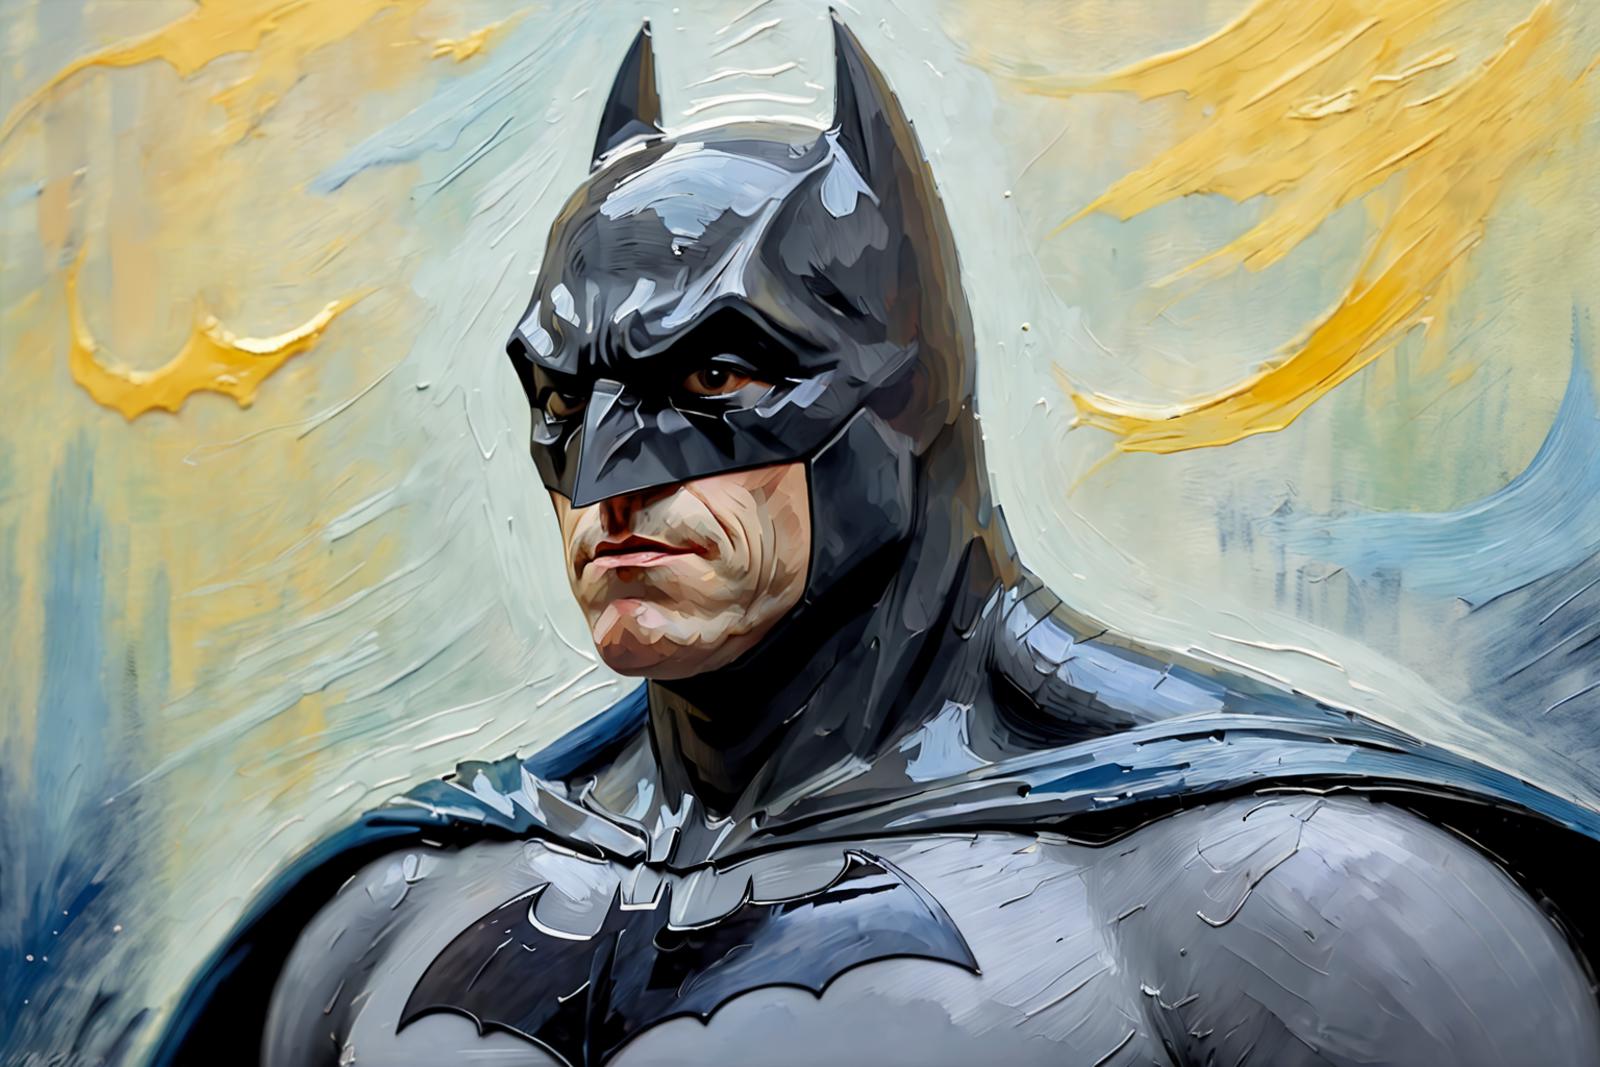 A Painting of a Man in a Batman Suit with a Batman Mask and Cape